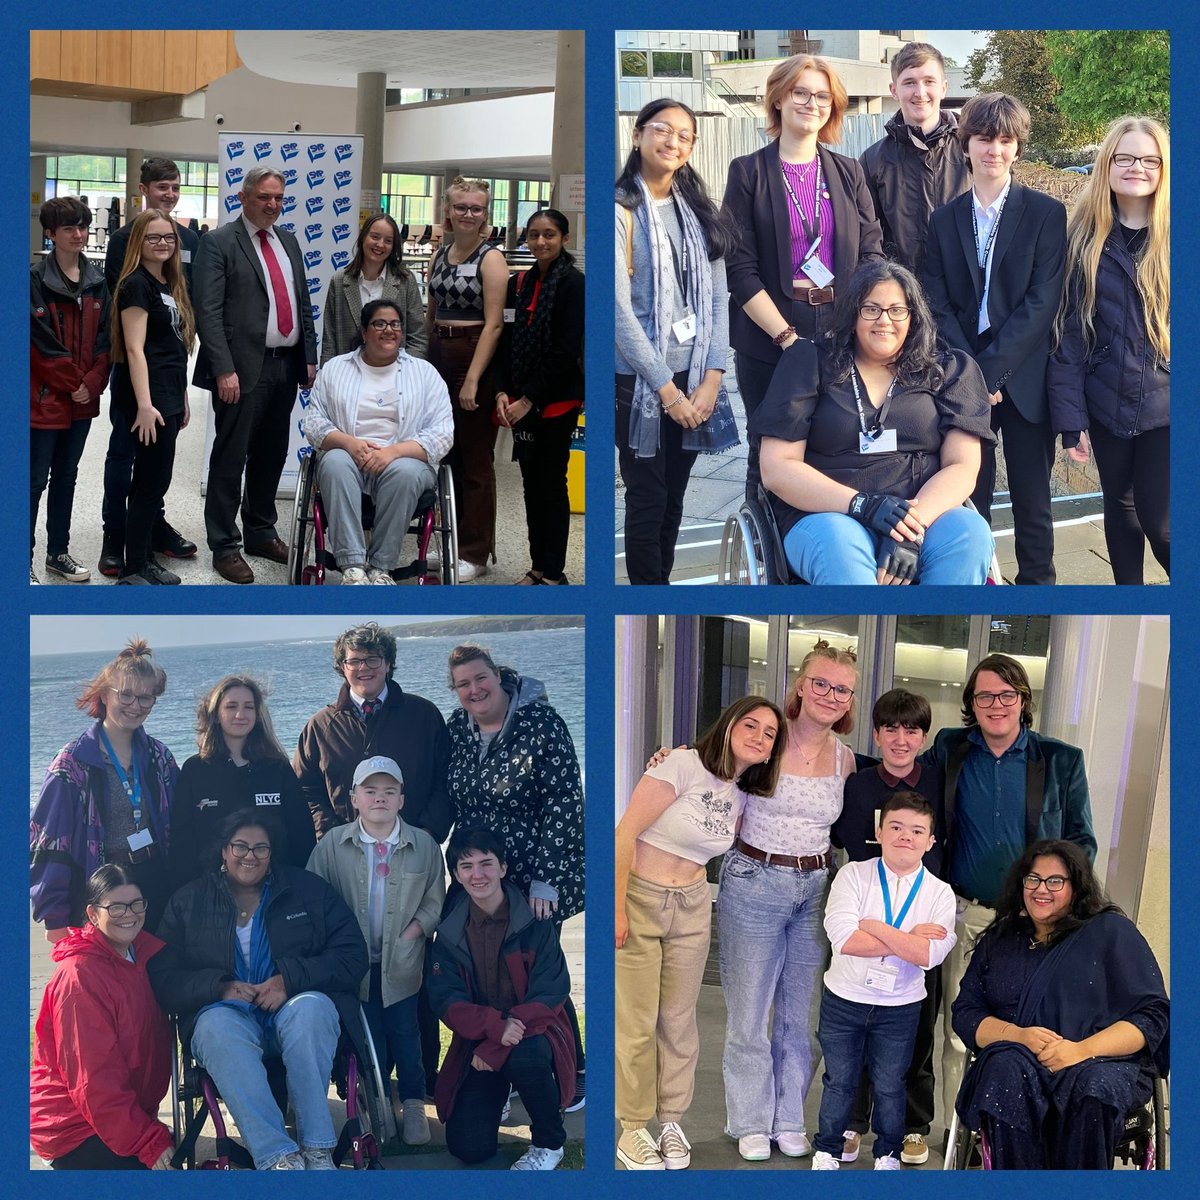 Today marks another official end of term for MSYPs across Scotland! The young people who represented @NLCYouthwork the past 2 years have been amazing & it's been my absolute pleasure to work with them! It's never goodbye, just see you soon! Good luck in your next adventures ✨️